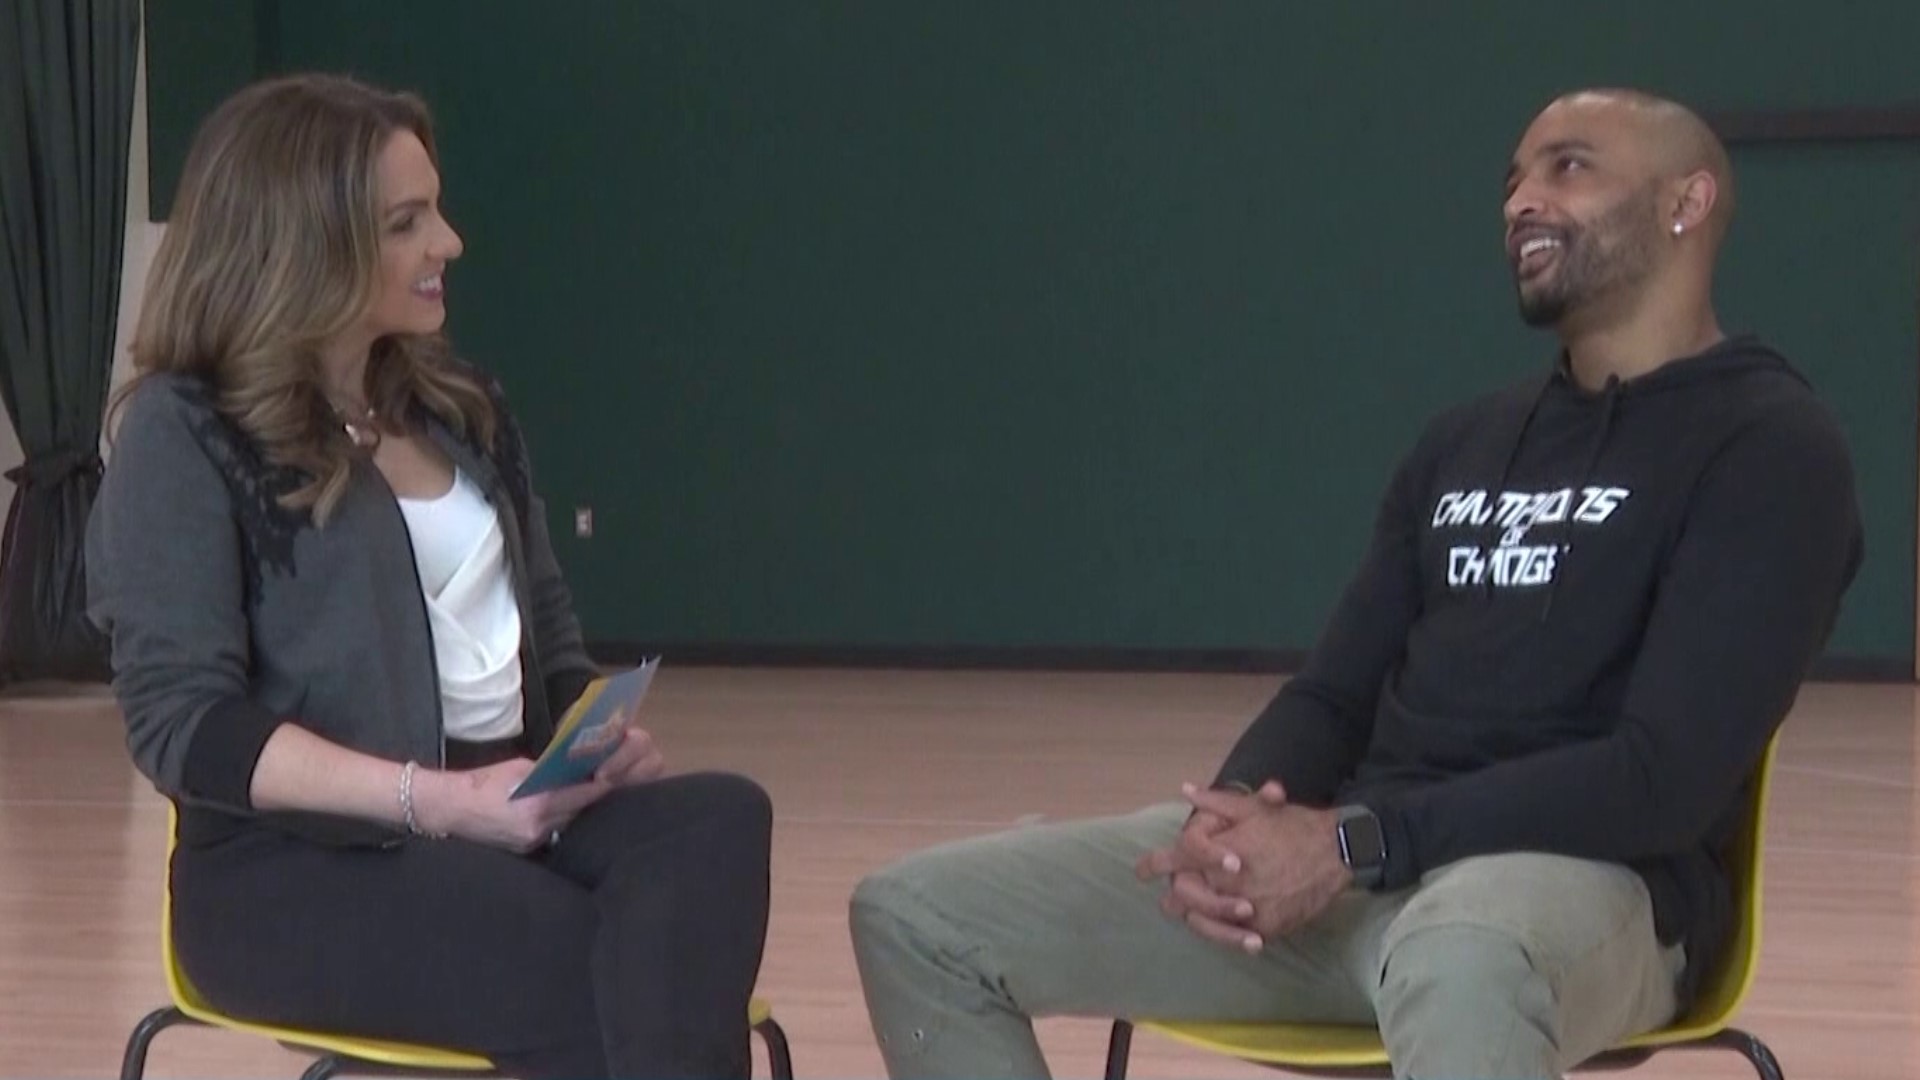 Amity chats with former Seahawks player Doug Baldwin about Champions of Change. Sponsored by Safeway/Albertsons.